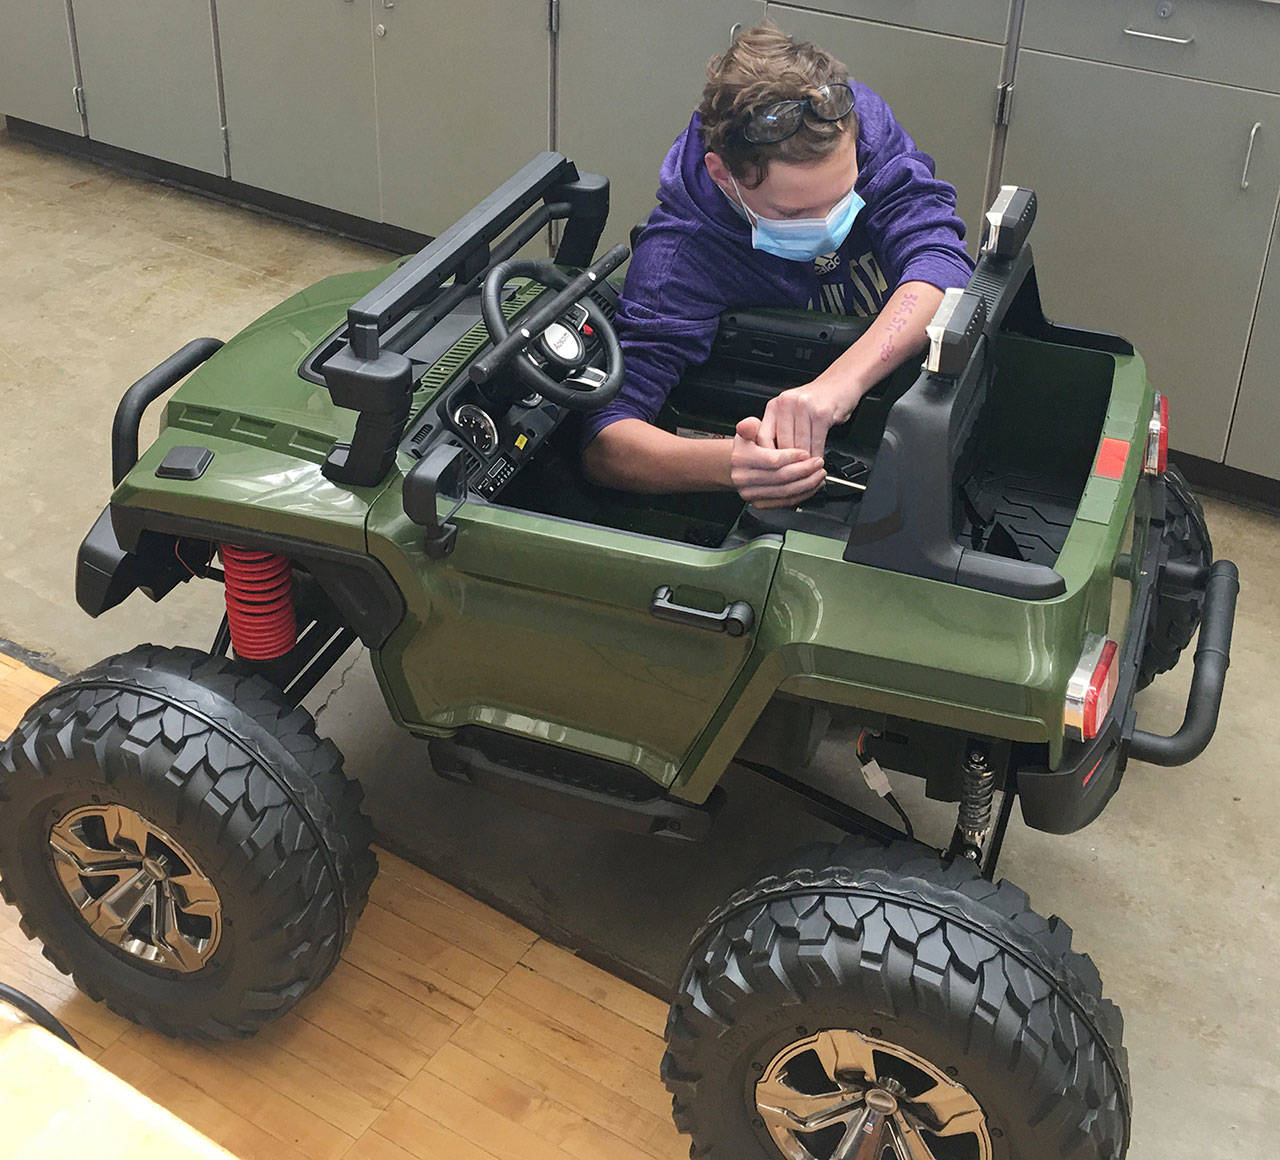 Enumclaw’s Eli Murphy spent an estimated 75 hours modifying an electric car for a Colorado boy with special needs (pictured here). The local photos show Eli modifying the vehicle’s seatbelt and putting finishing touches on a personalized license plate.